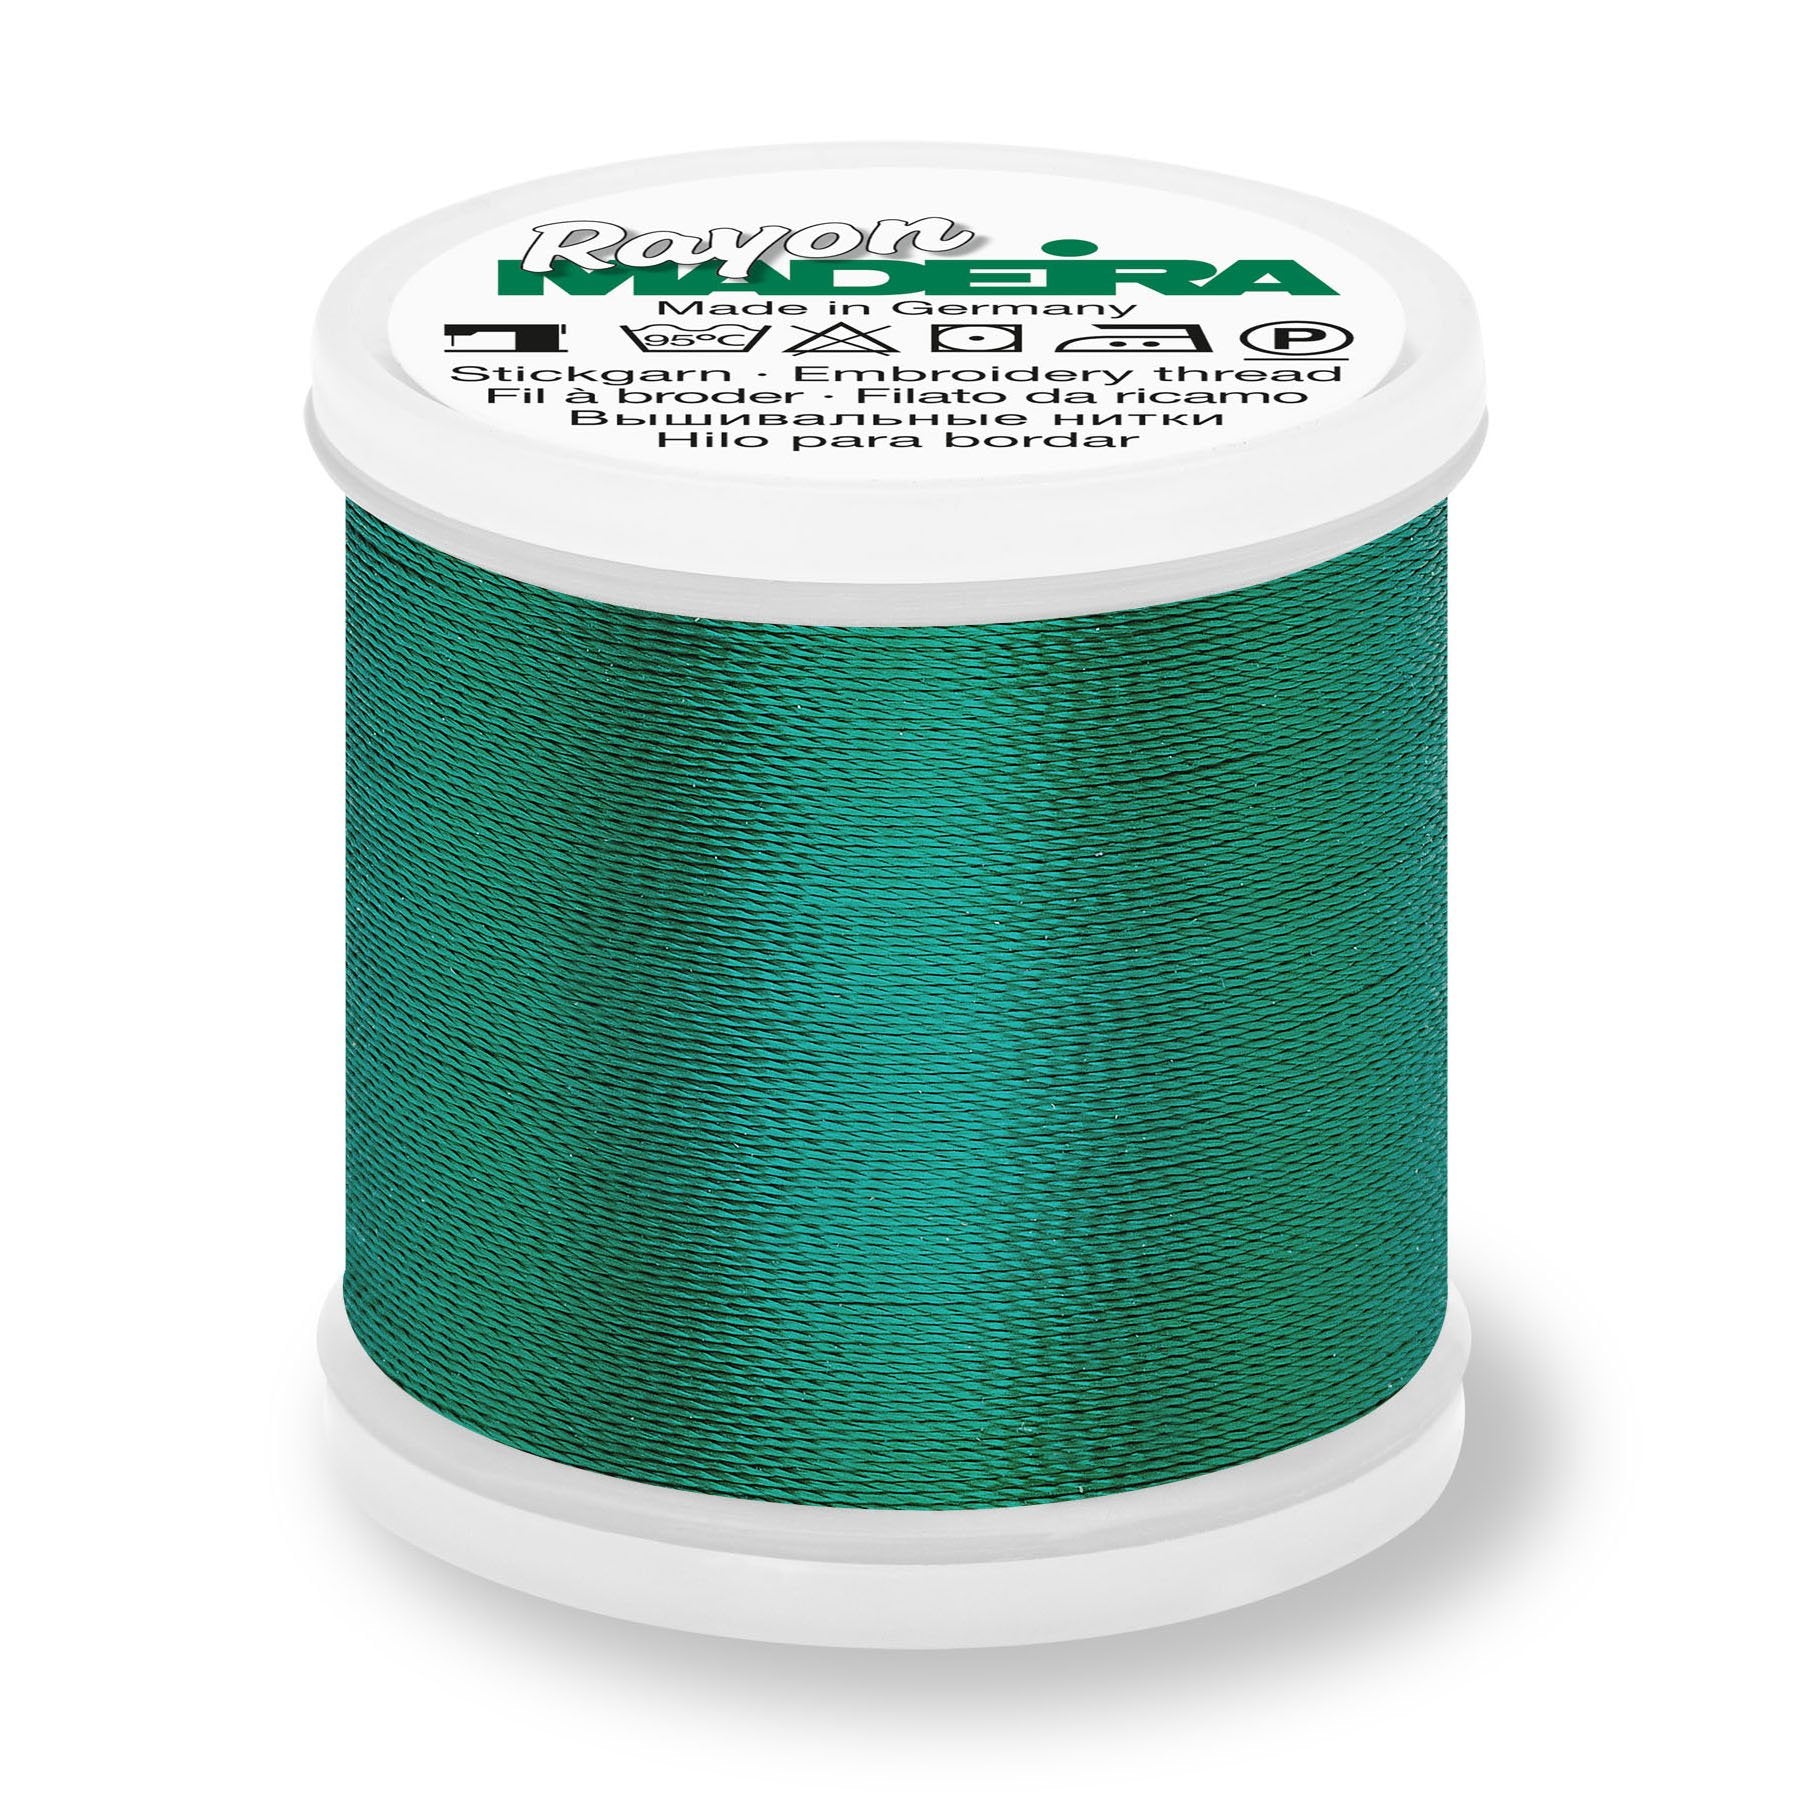 Madeira Rayon 40 Embroidery Thread 200m #1293 Dark Teal from Jaycotts Sewing Supplies